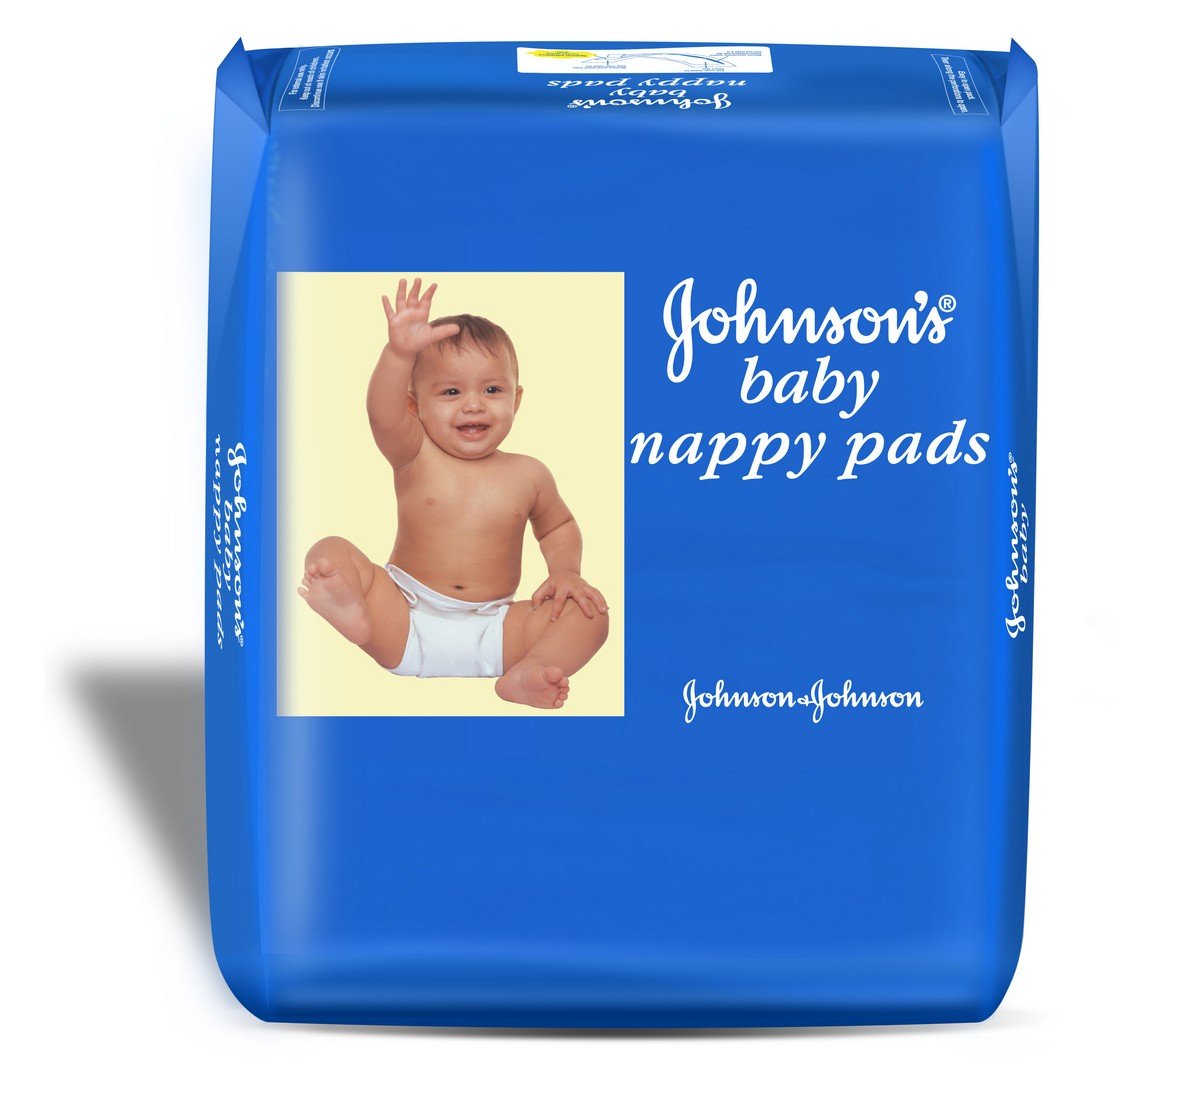 Johnson's Baby Nappy Pads (20 pads)